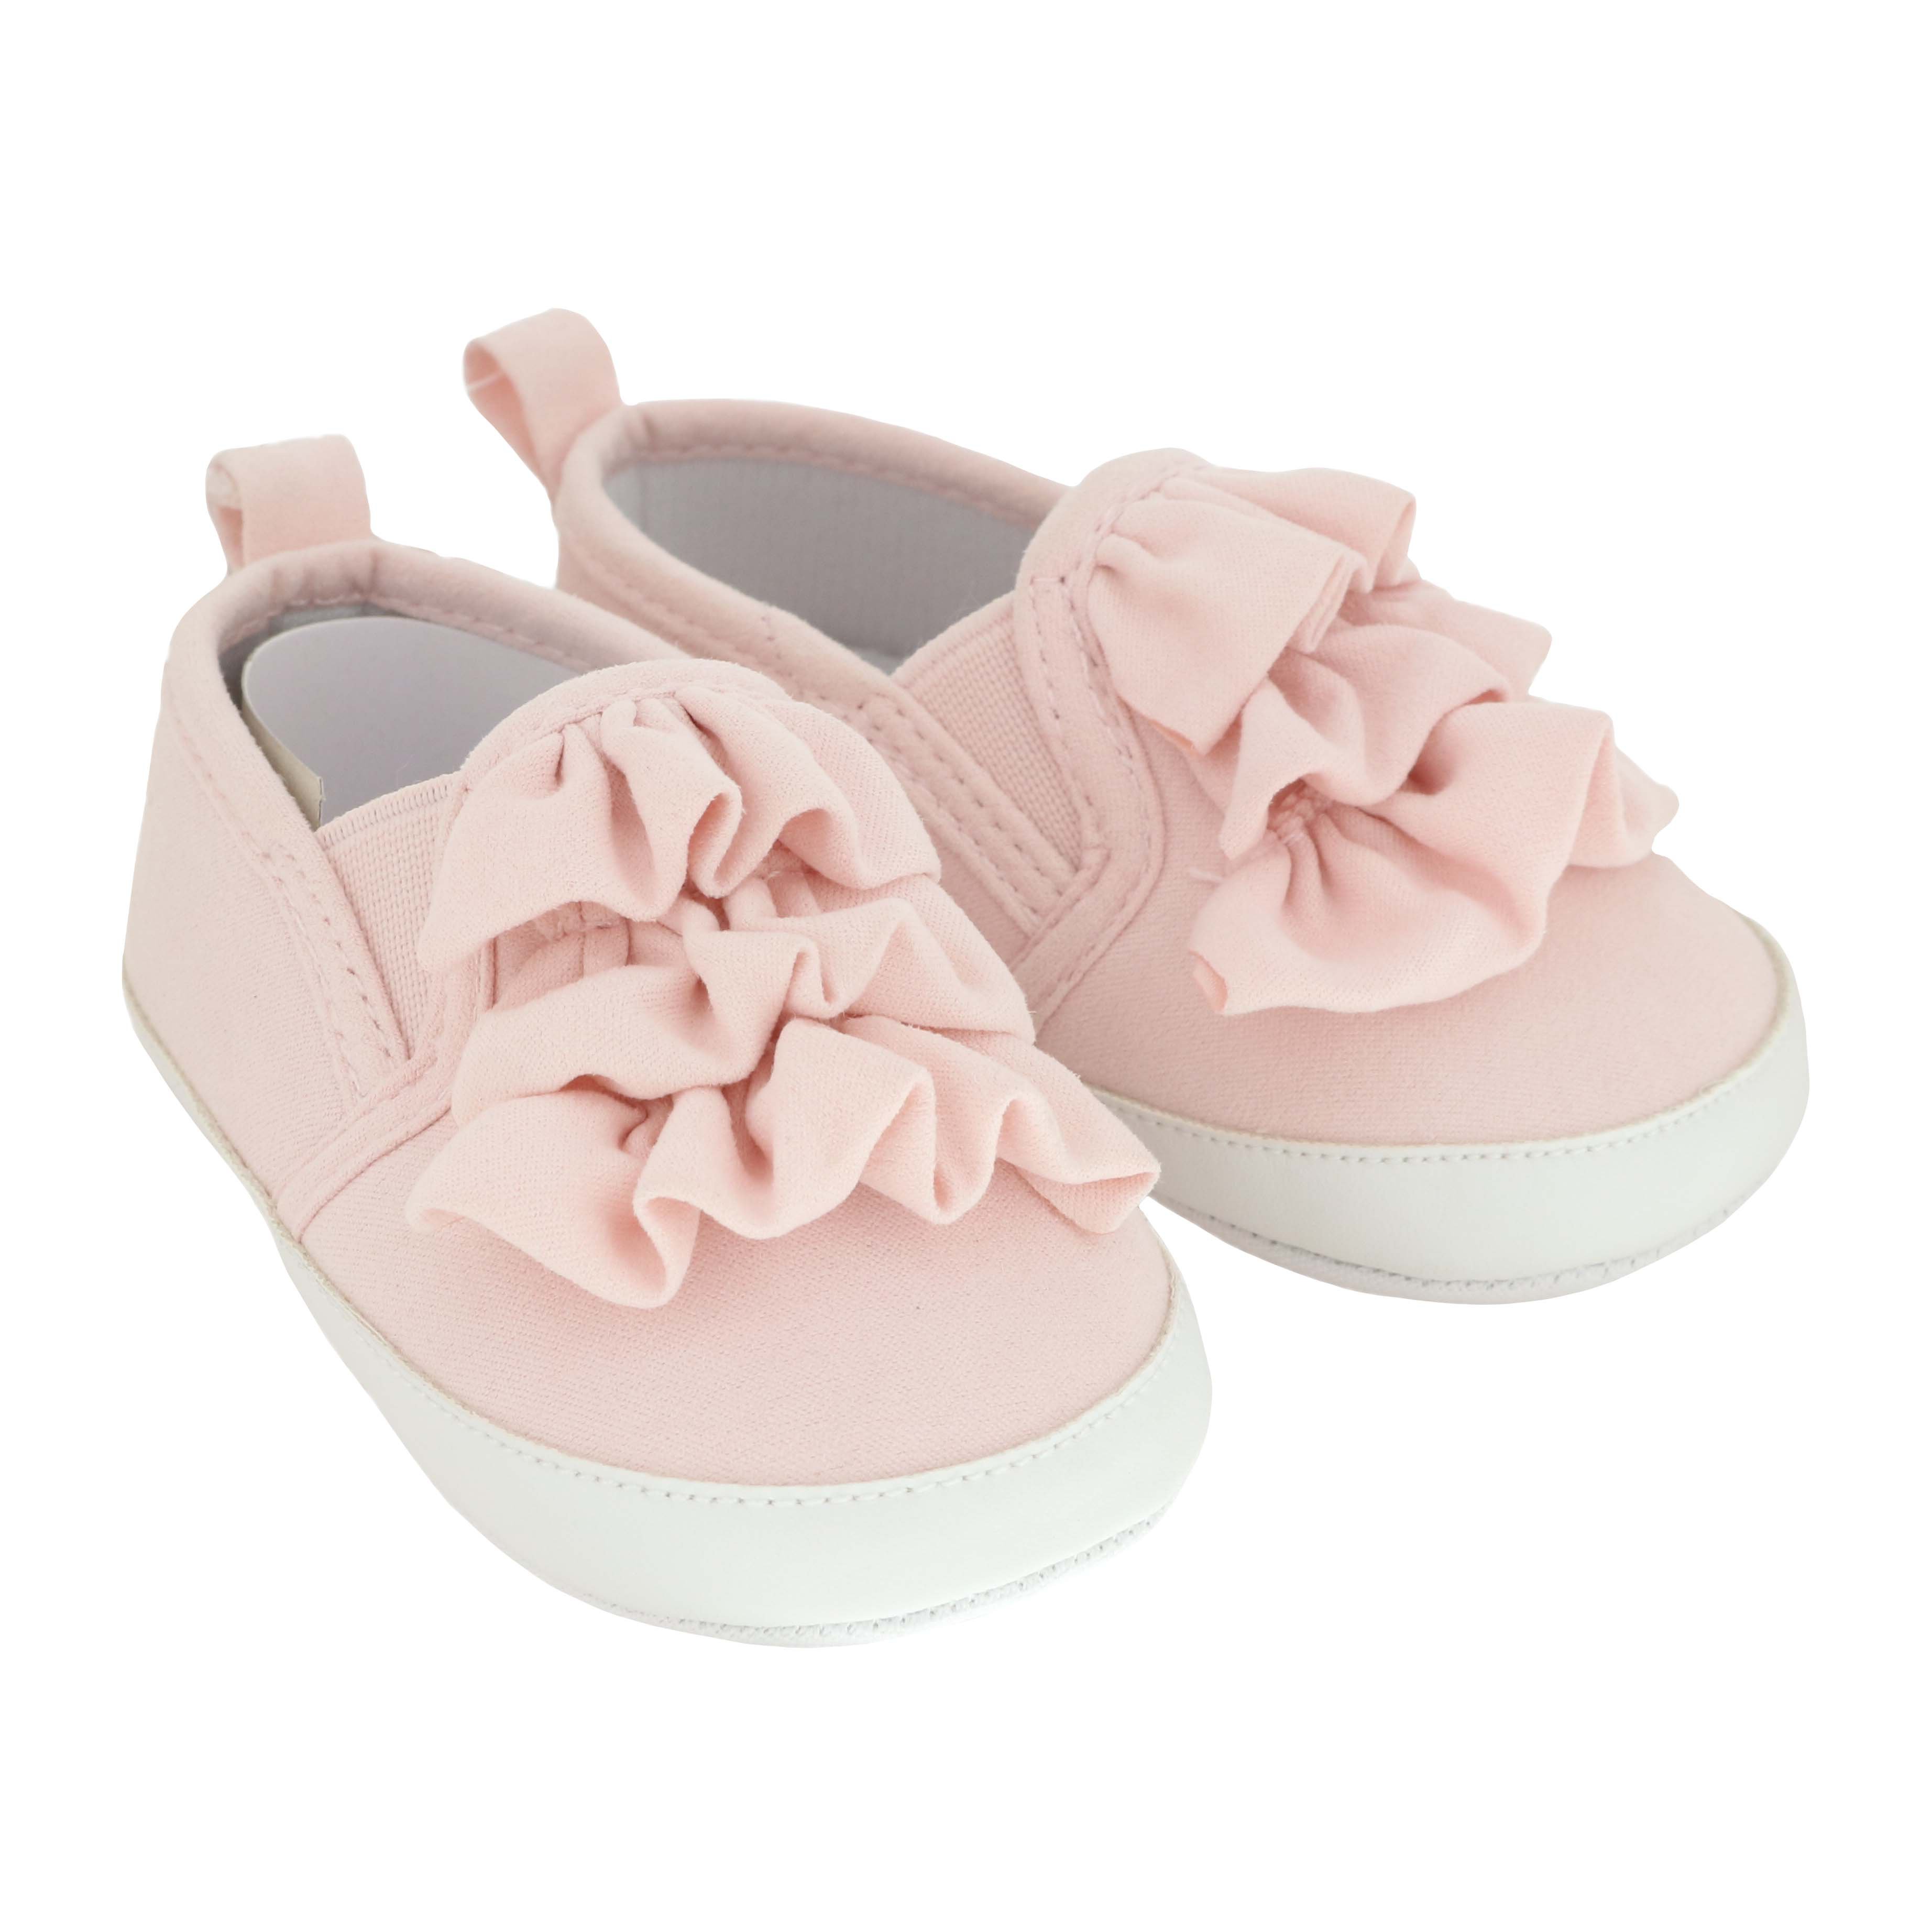 pink baby shoes size 3